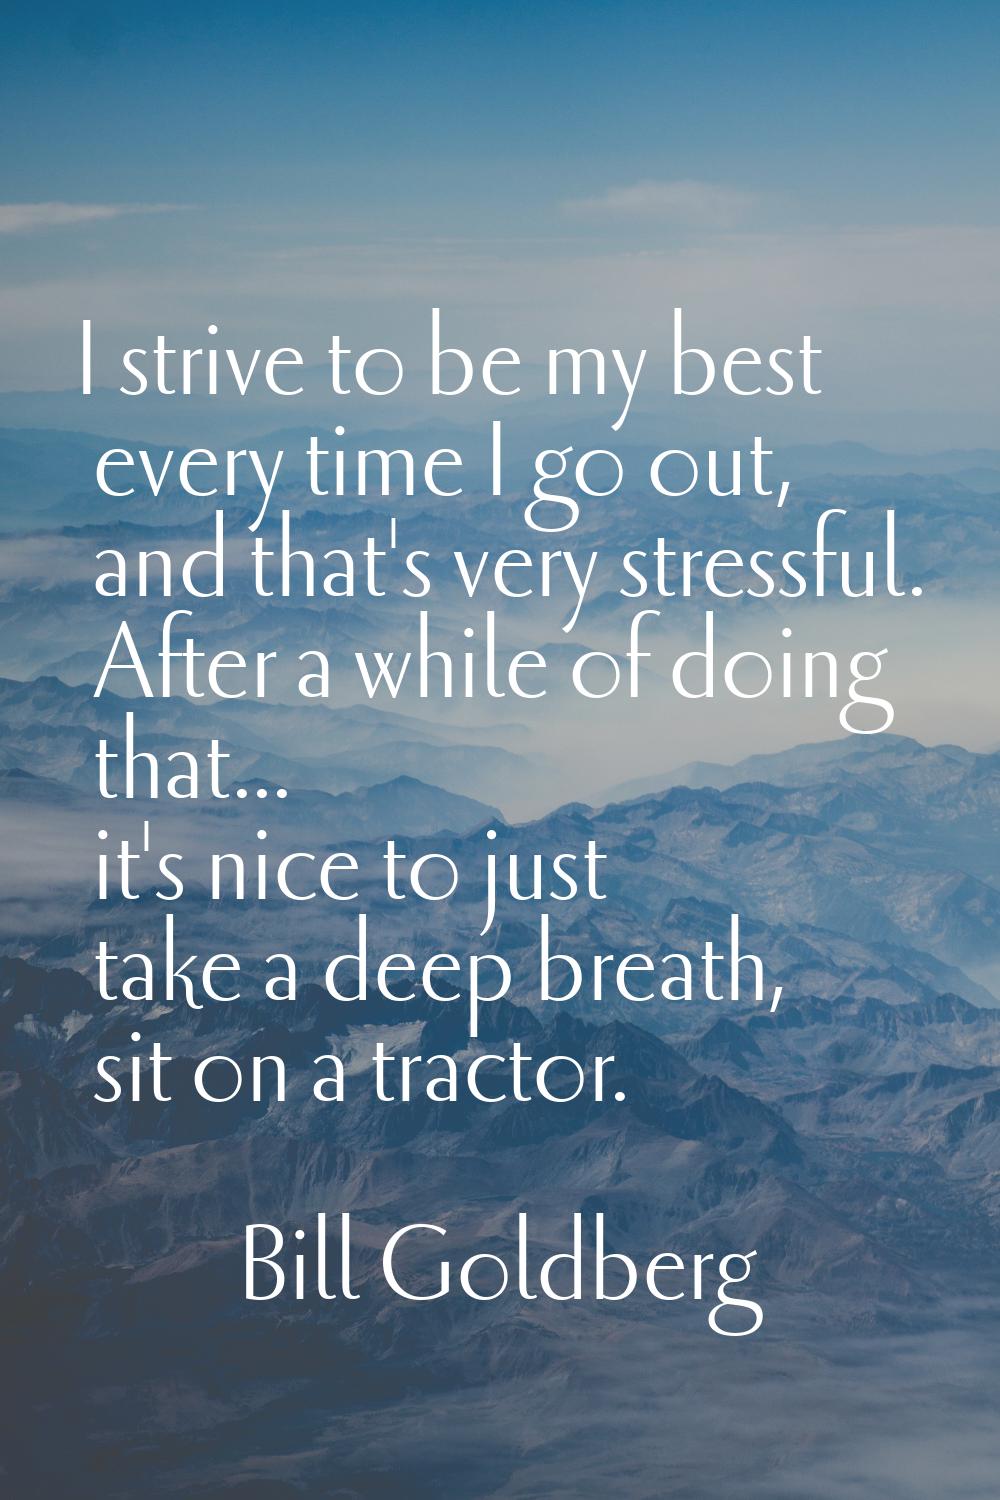 I strive to be my best every time I go out, and that's very stressful. After a while of doing that.